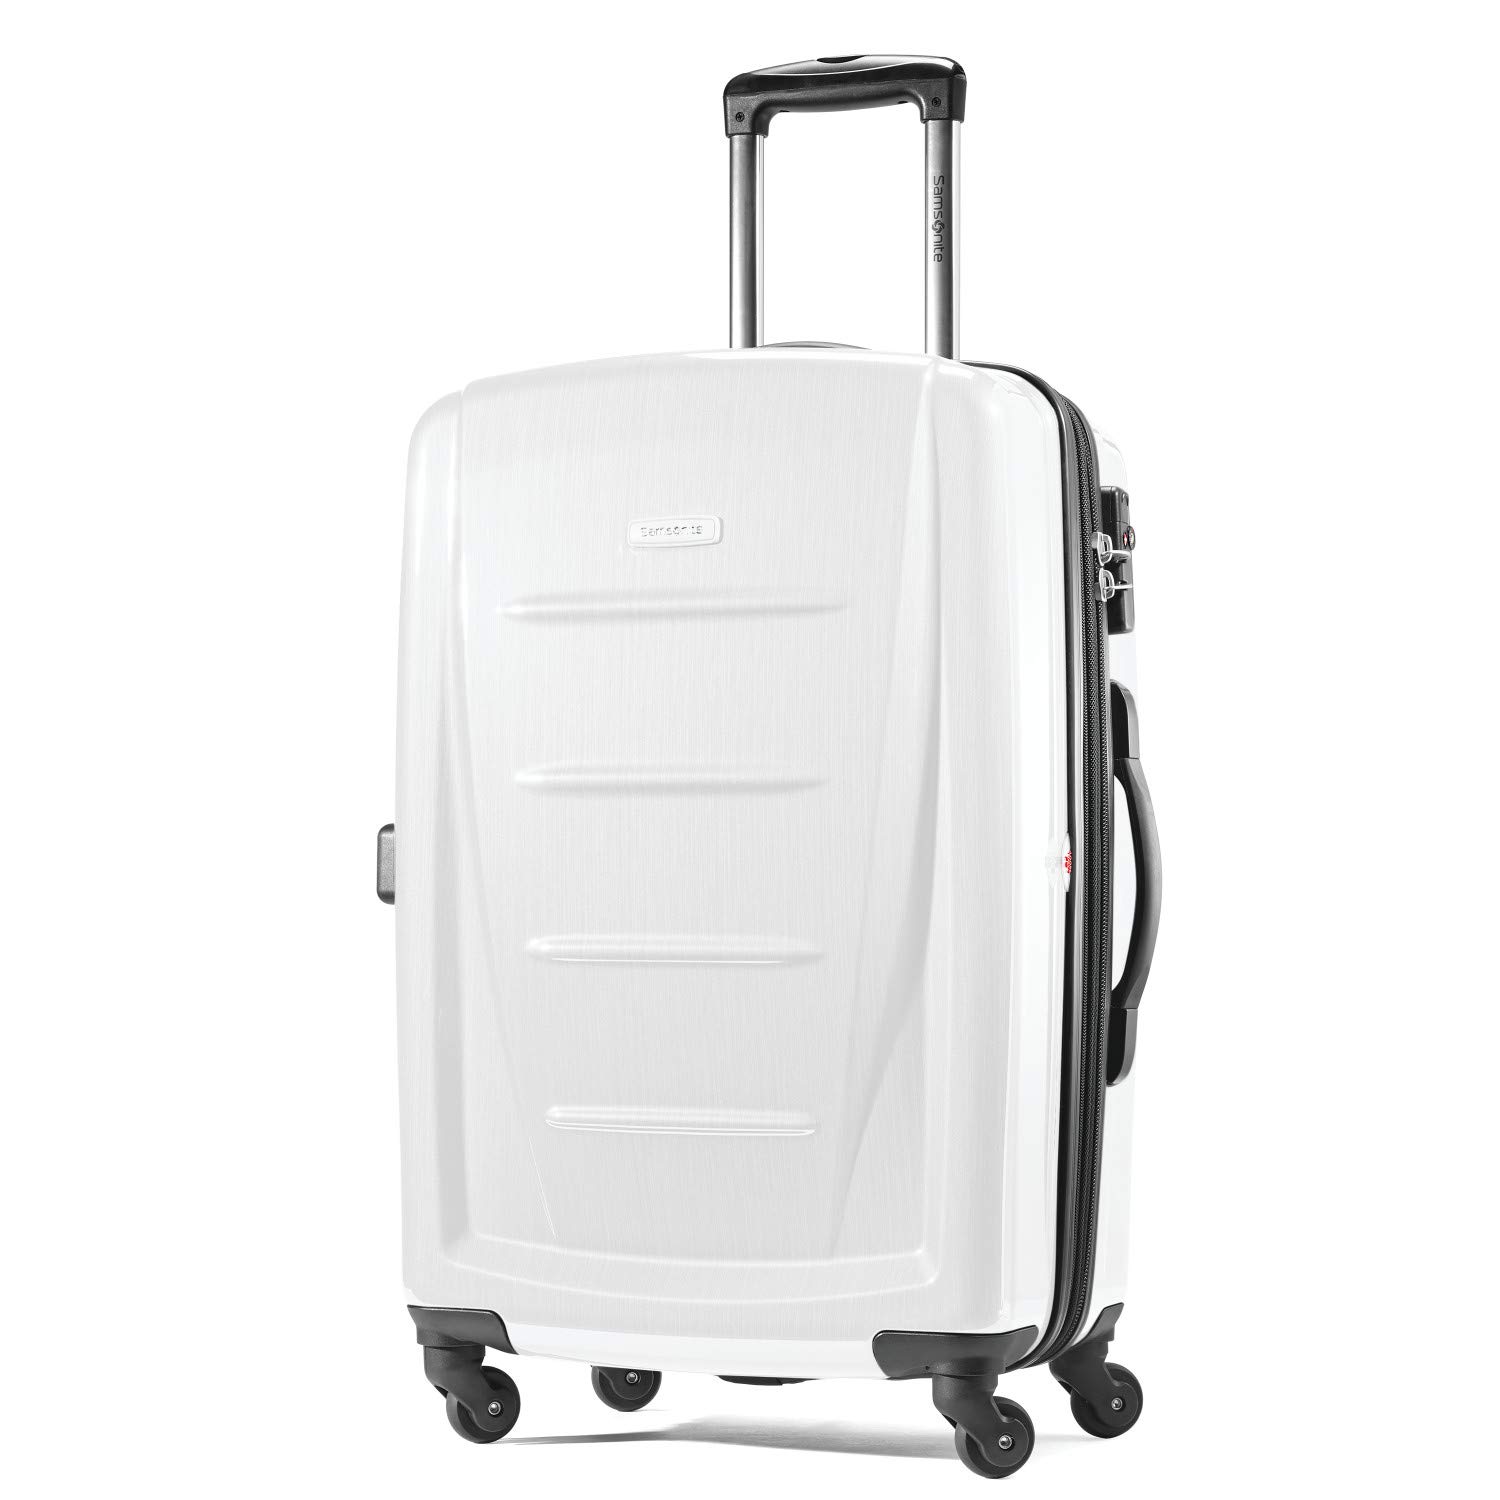 Samsonite Winfield 2 Hardside Expandable Luggage with Spinner Wheels, Carry-On 20-Inch, Nordic Blue $89.99